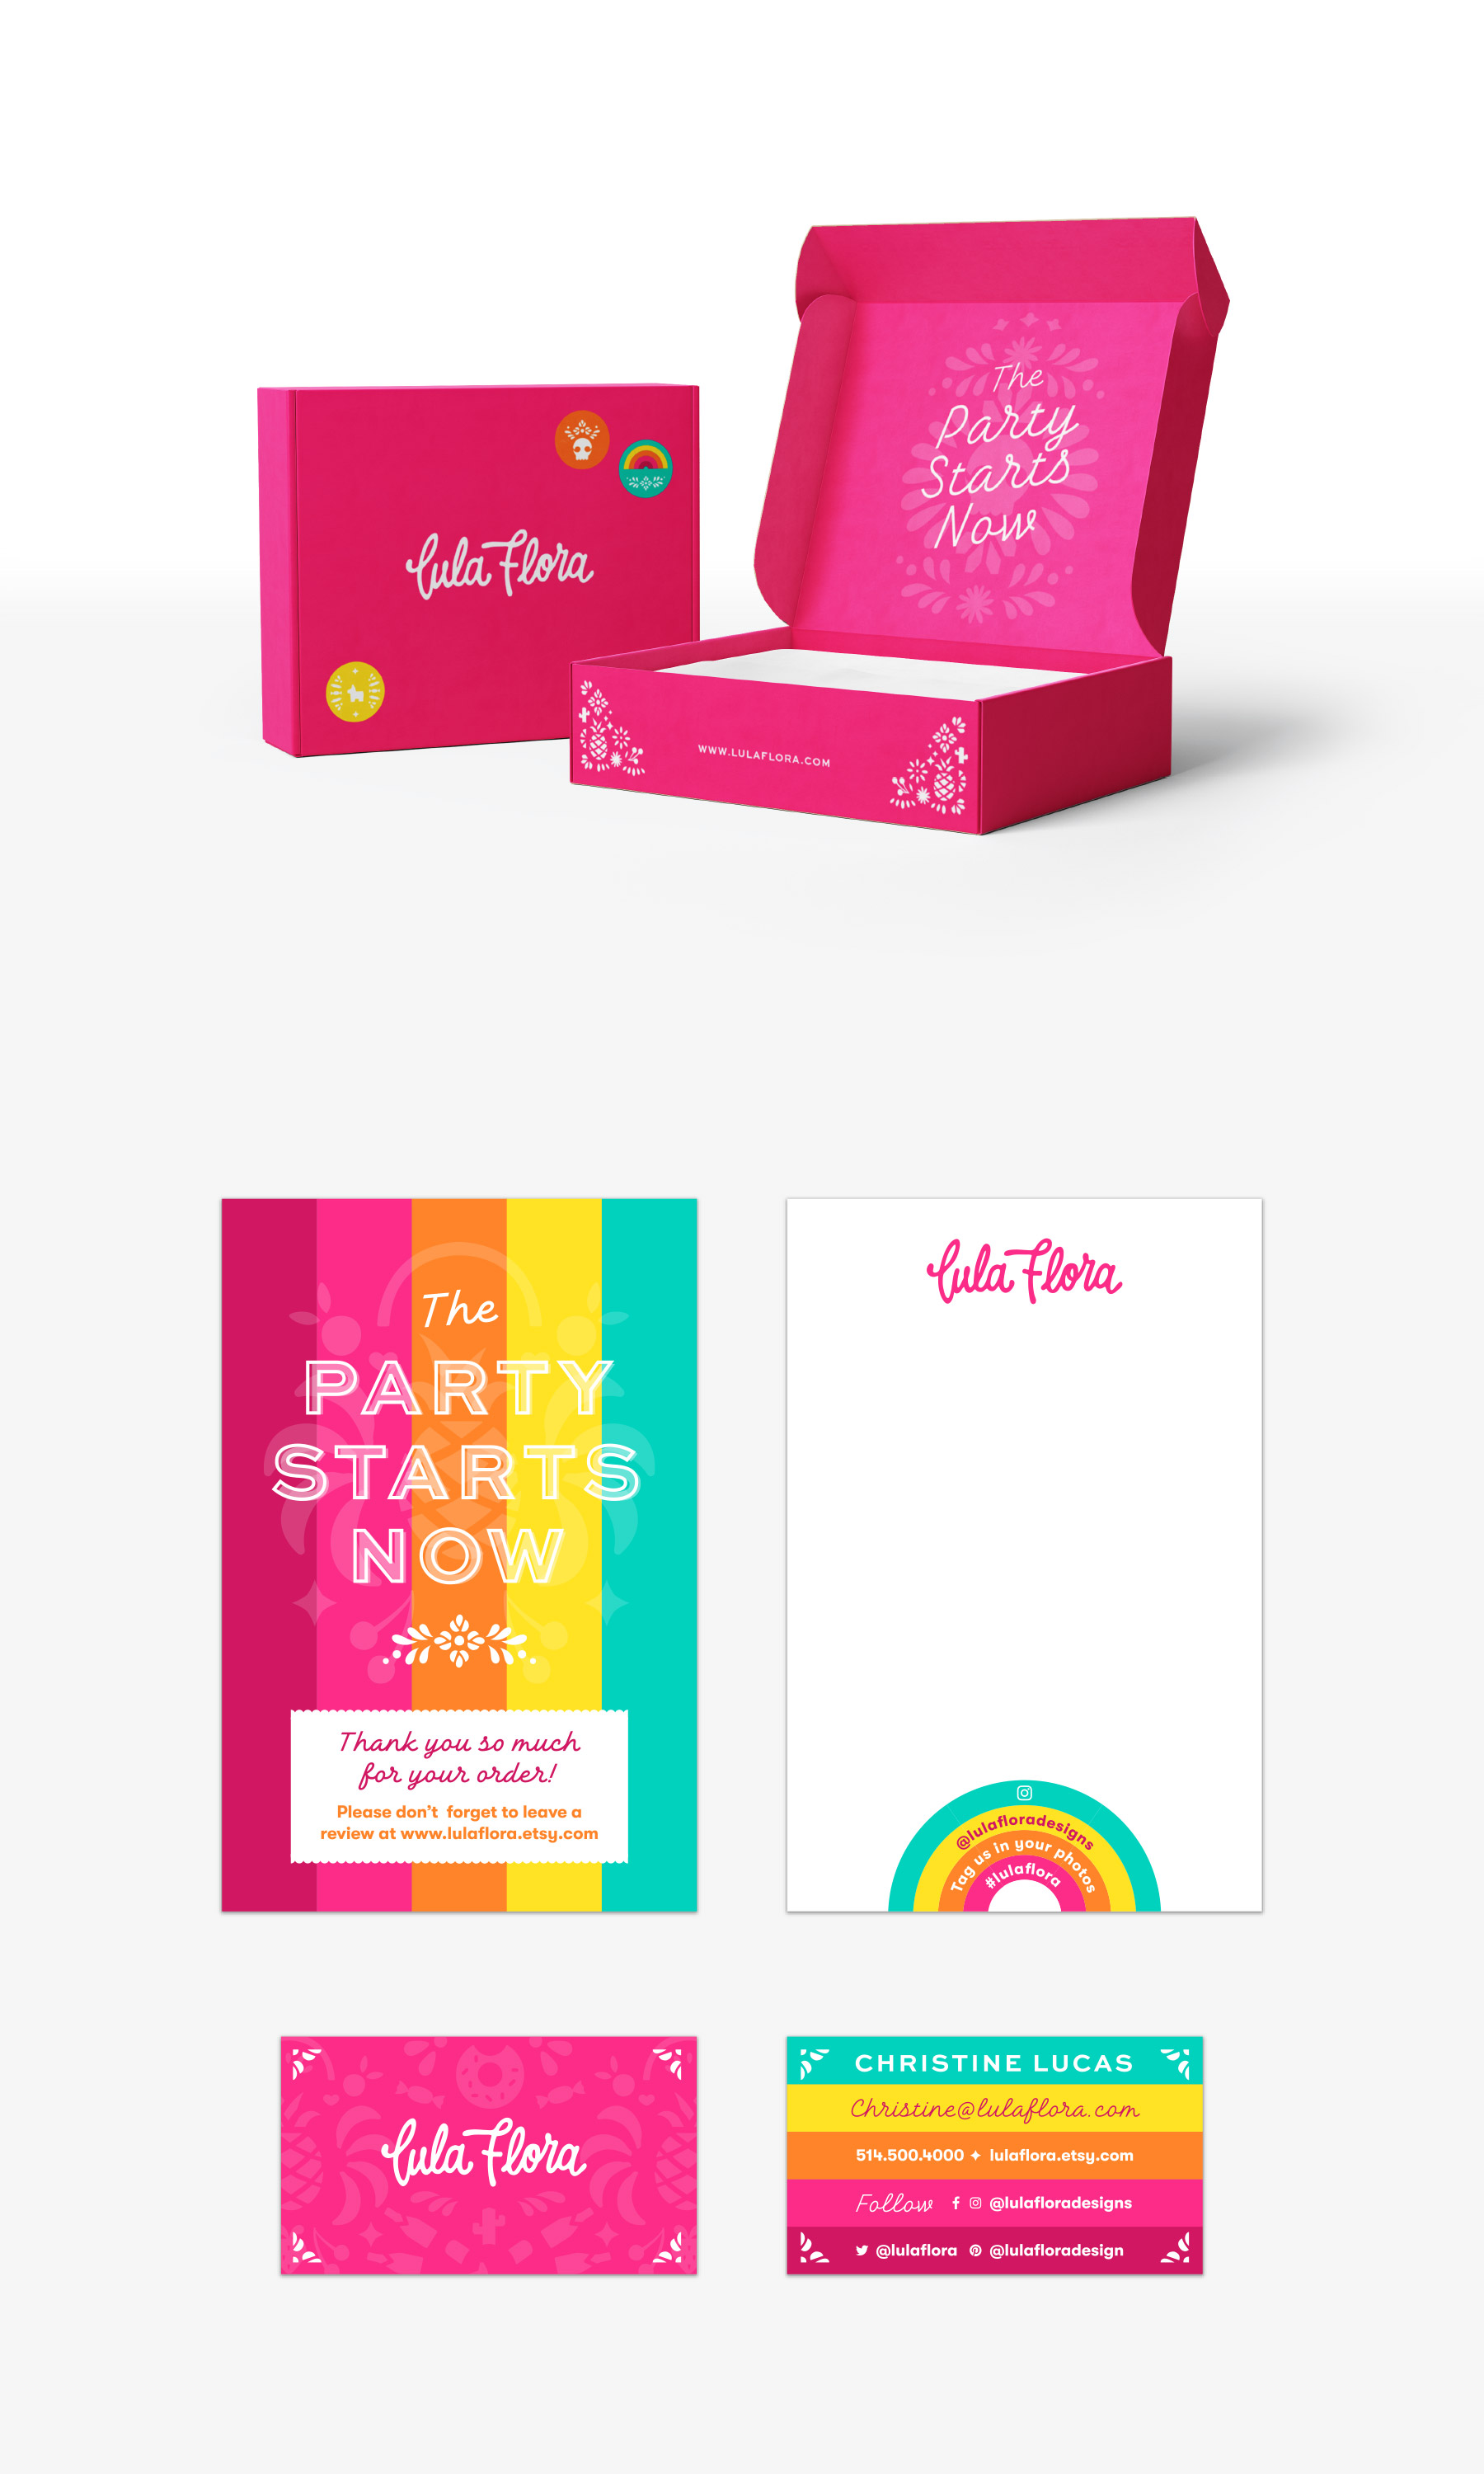 Create product packaging box design for miniature piñatas with thank you card